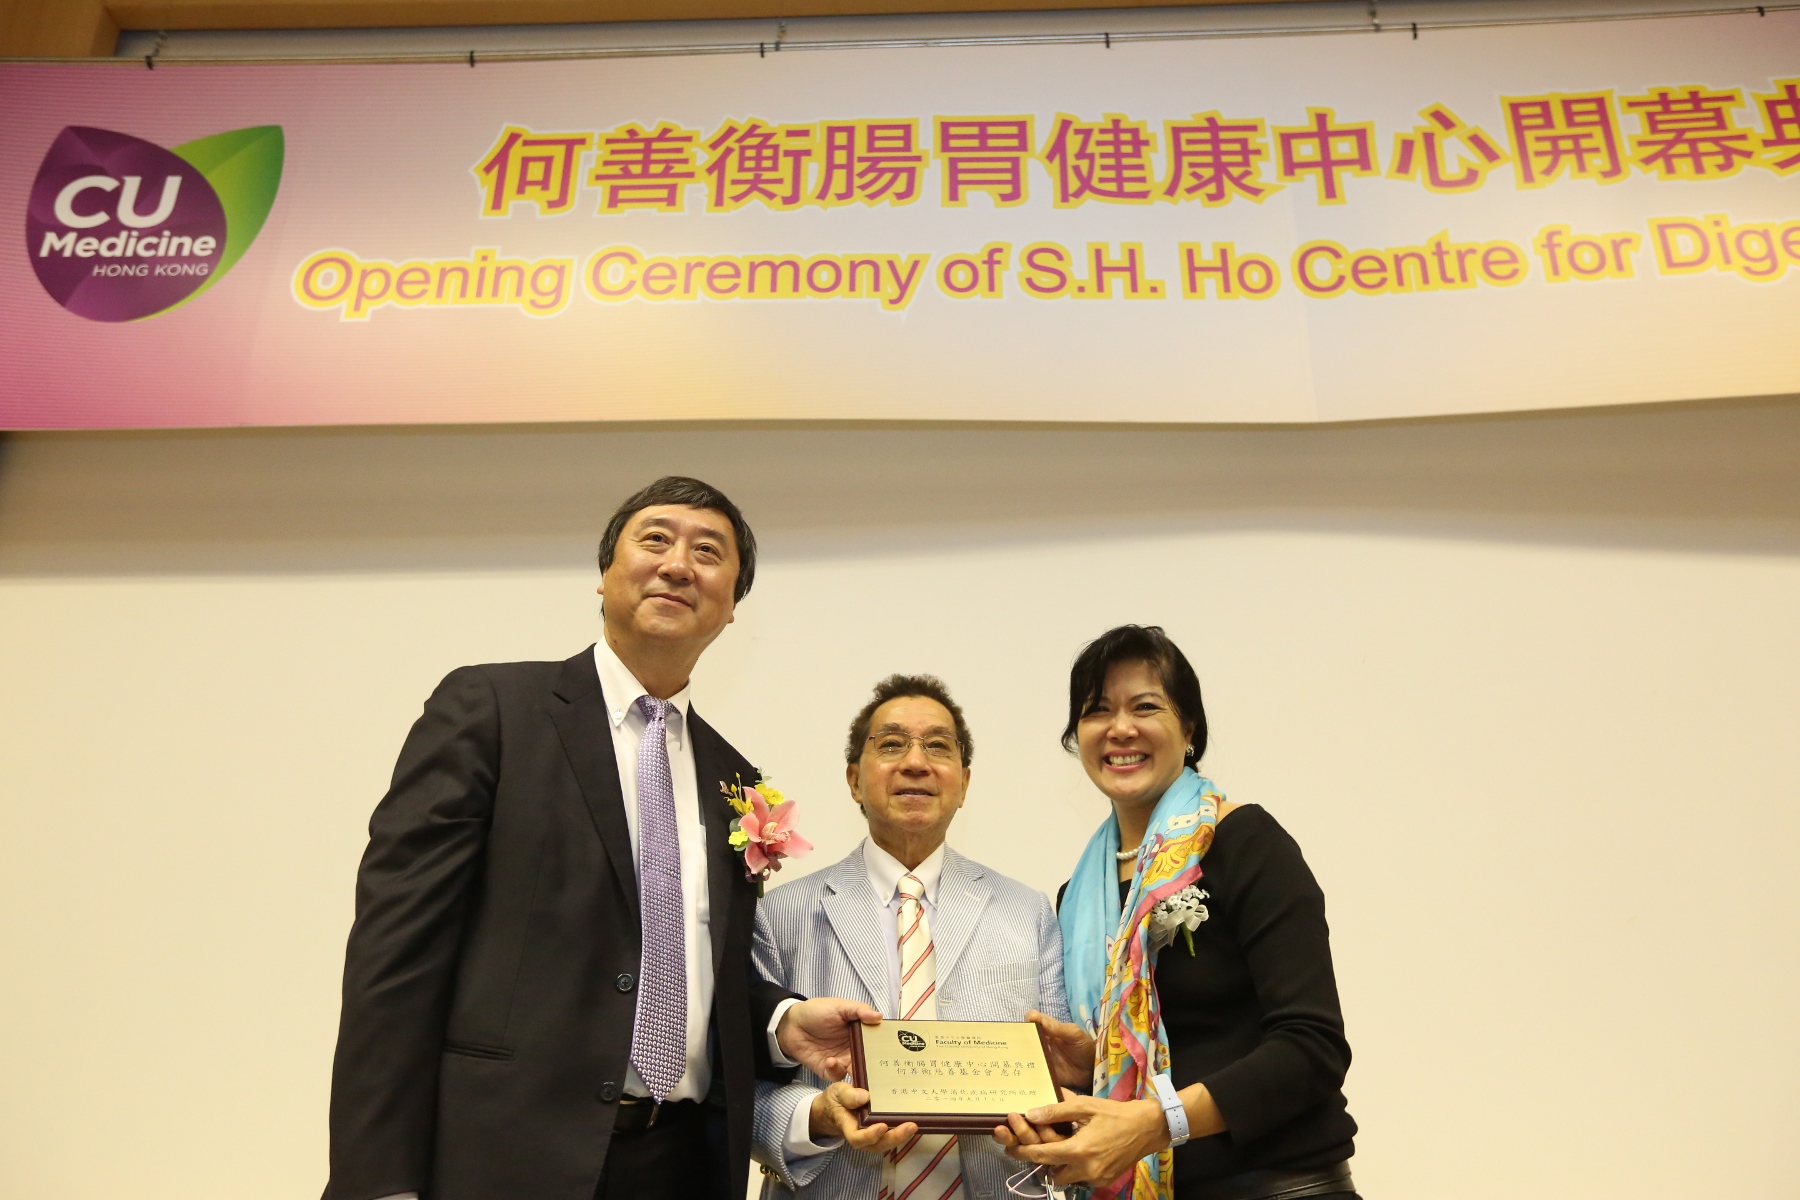 Prof. Joseph J.Y. Sung, Vice-Chancellor and President of CUHK, presents gift to Dr Tsz-leung Ho, Governor